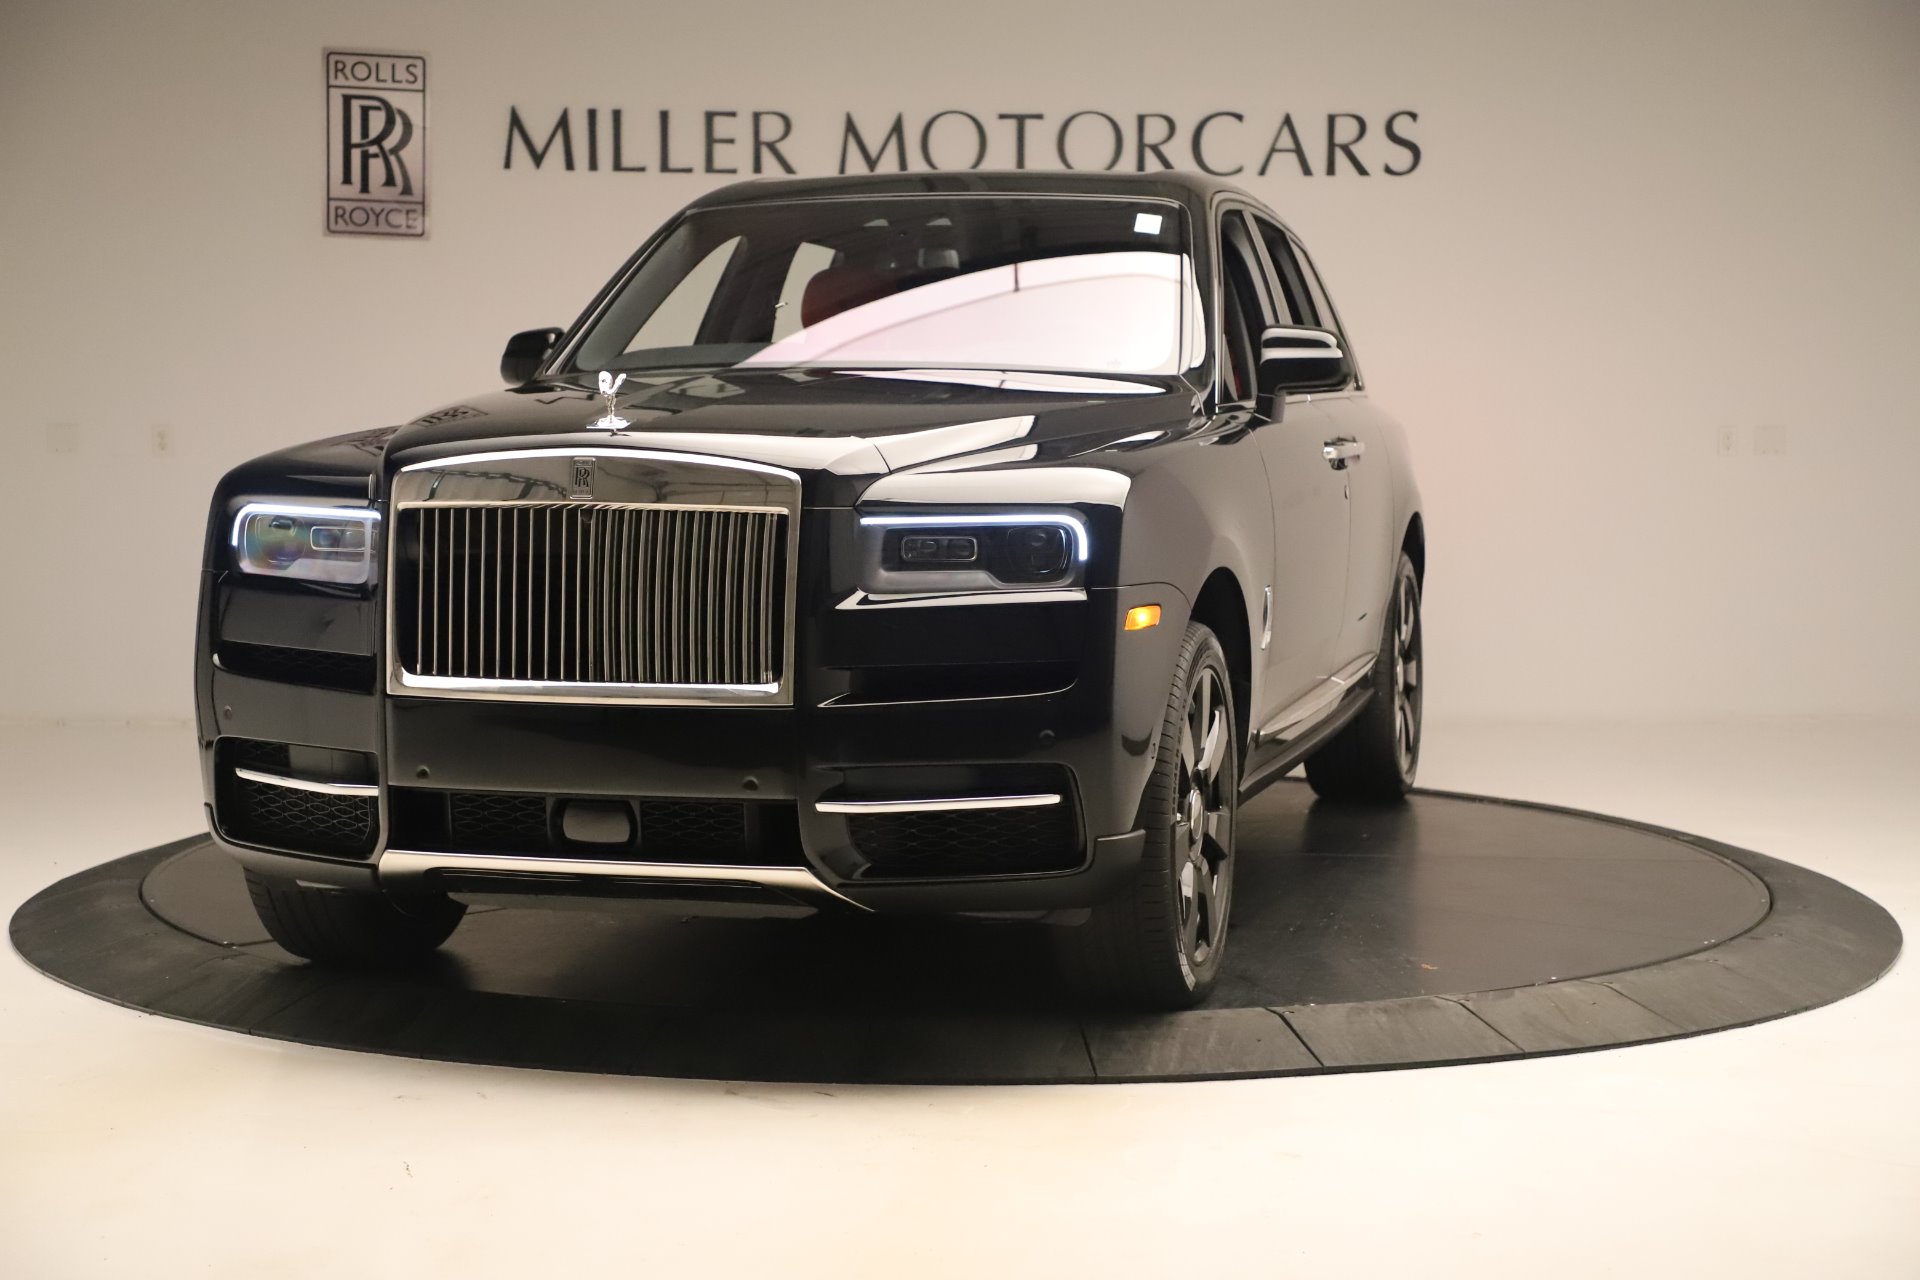 New 2020 Rolls-Royce Cullinan for sale Sold at Bentley Greenwich in Greenwich CT 06830 1